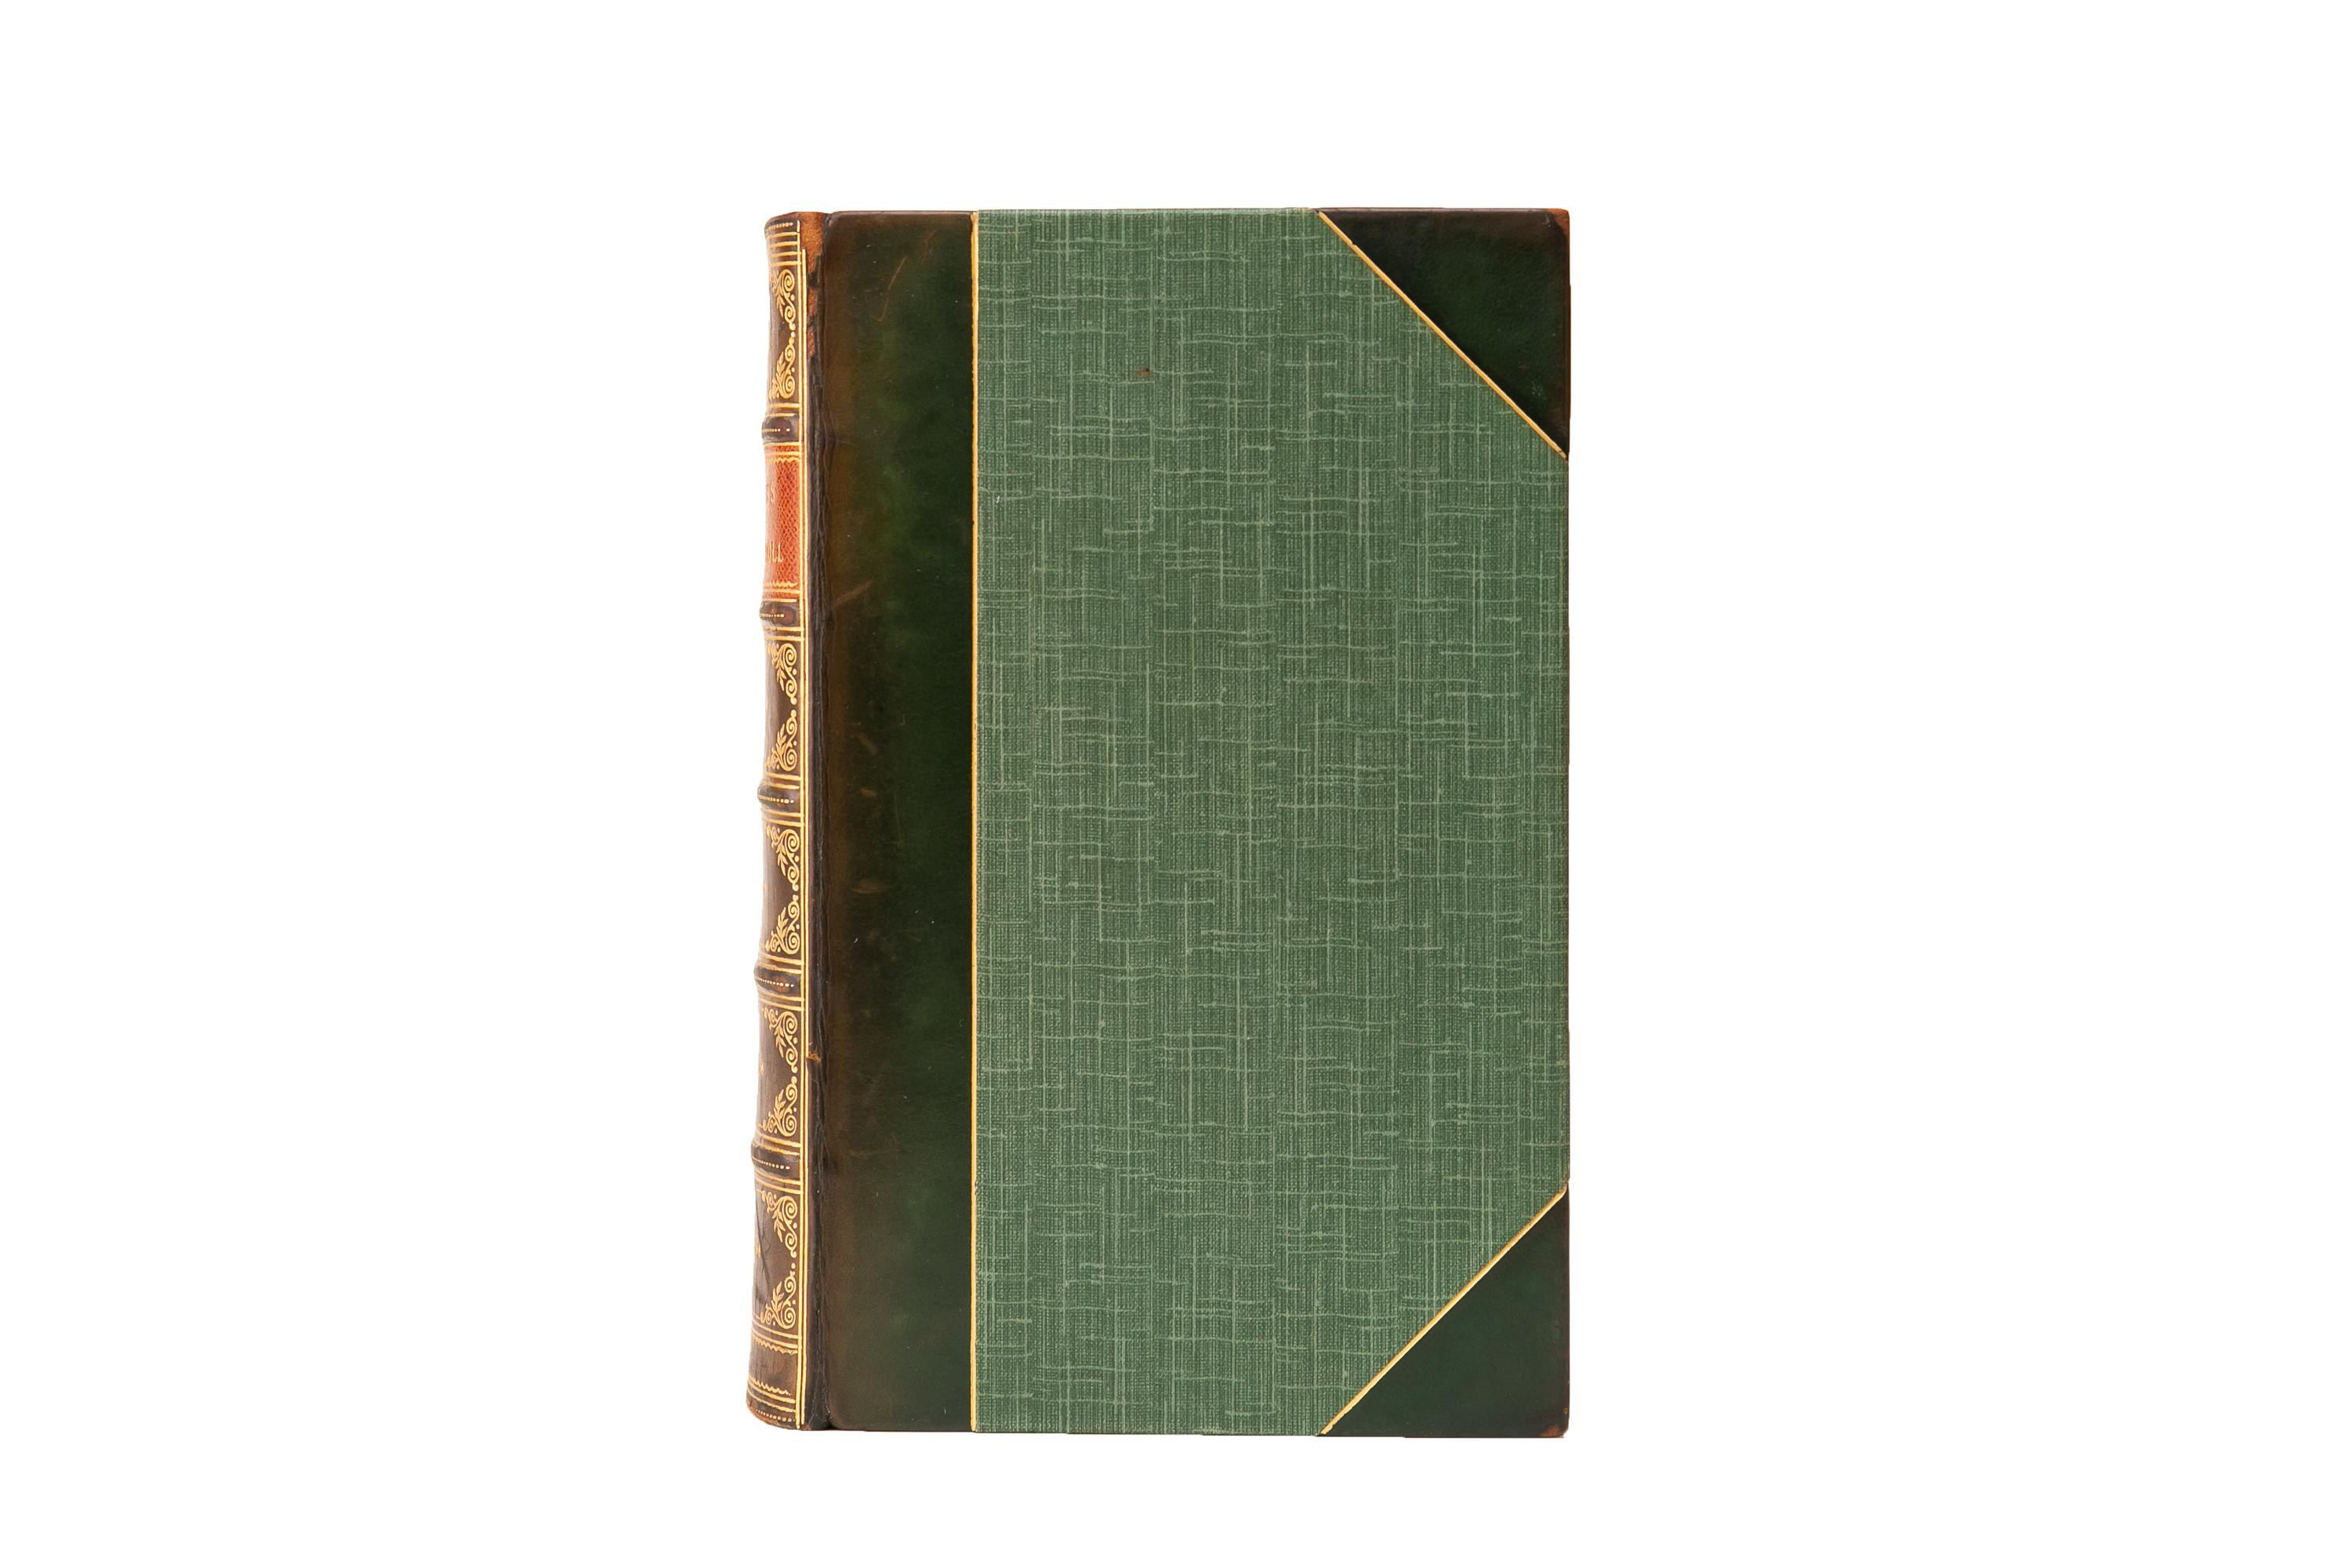 1 Volume. Lewis Carroll, The Works. First Nonesuch Edition. Bound in 3/4 green calf and linen boards. The covers and raised band spine are gilt-tooled with a tan morocco label. The top edge is gilt with marbled endpapers. Introduction by Alexander